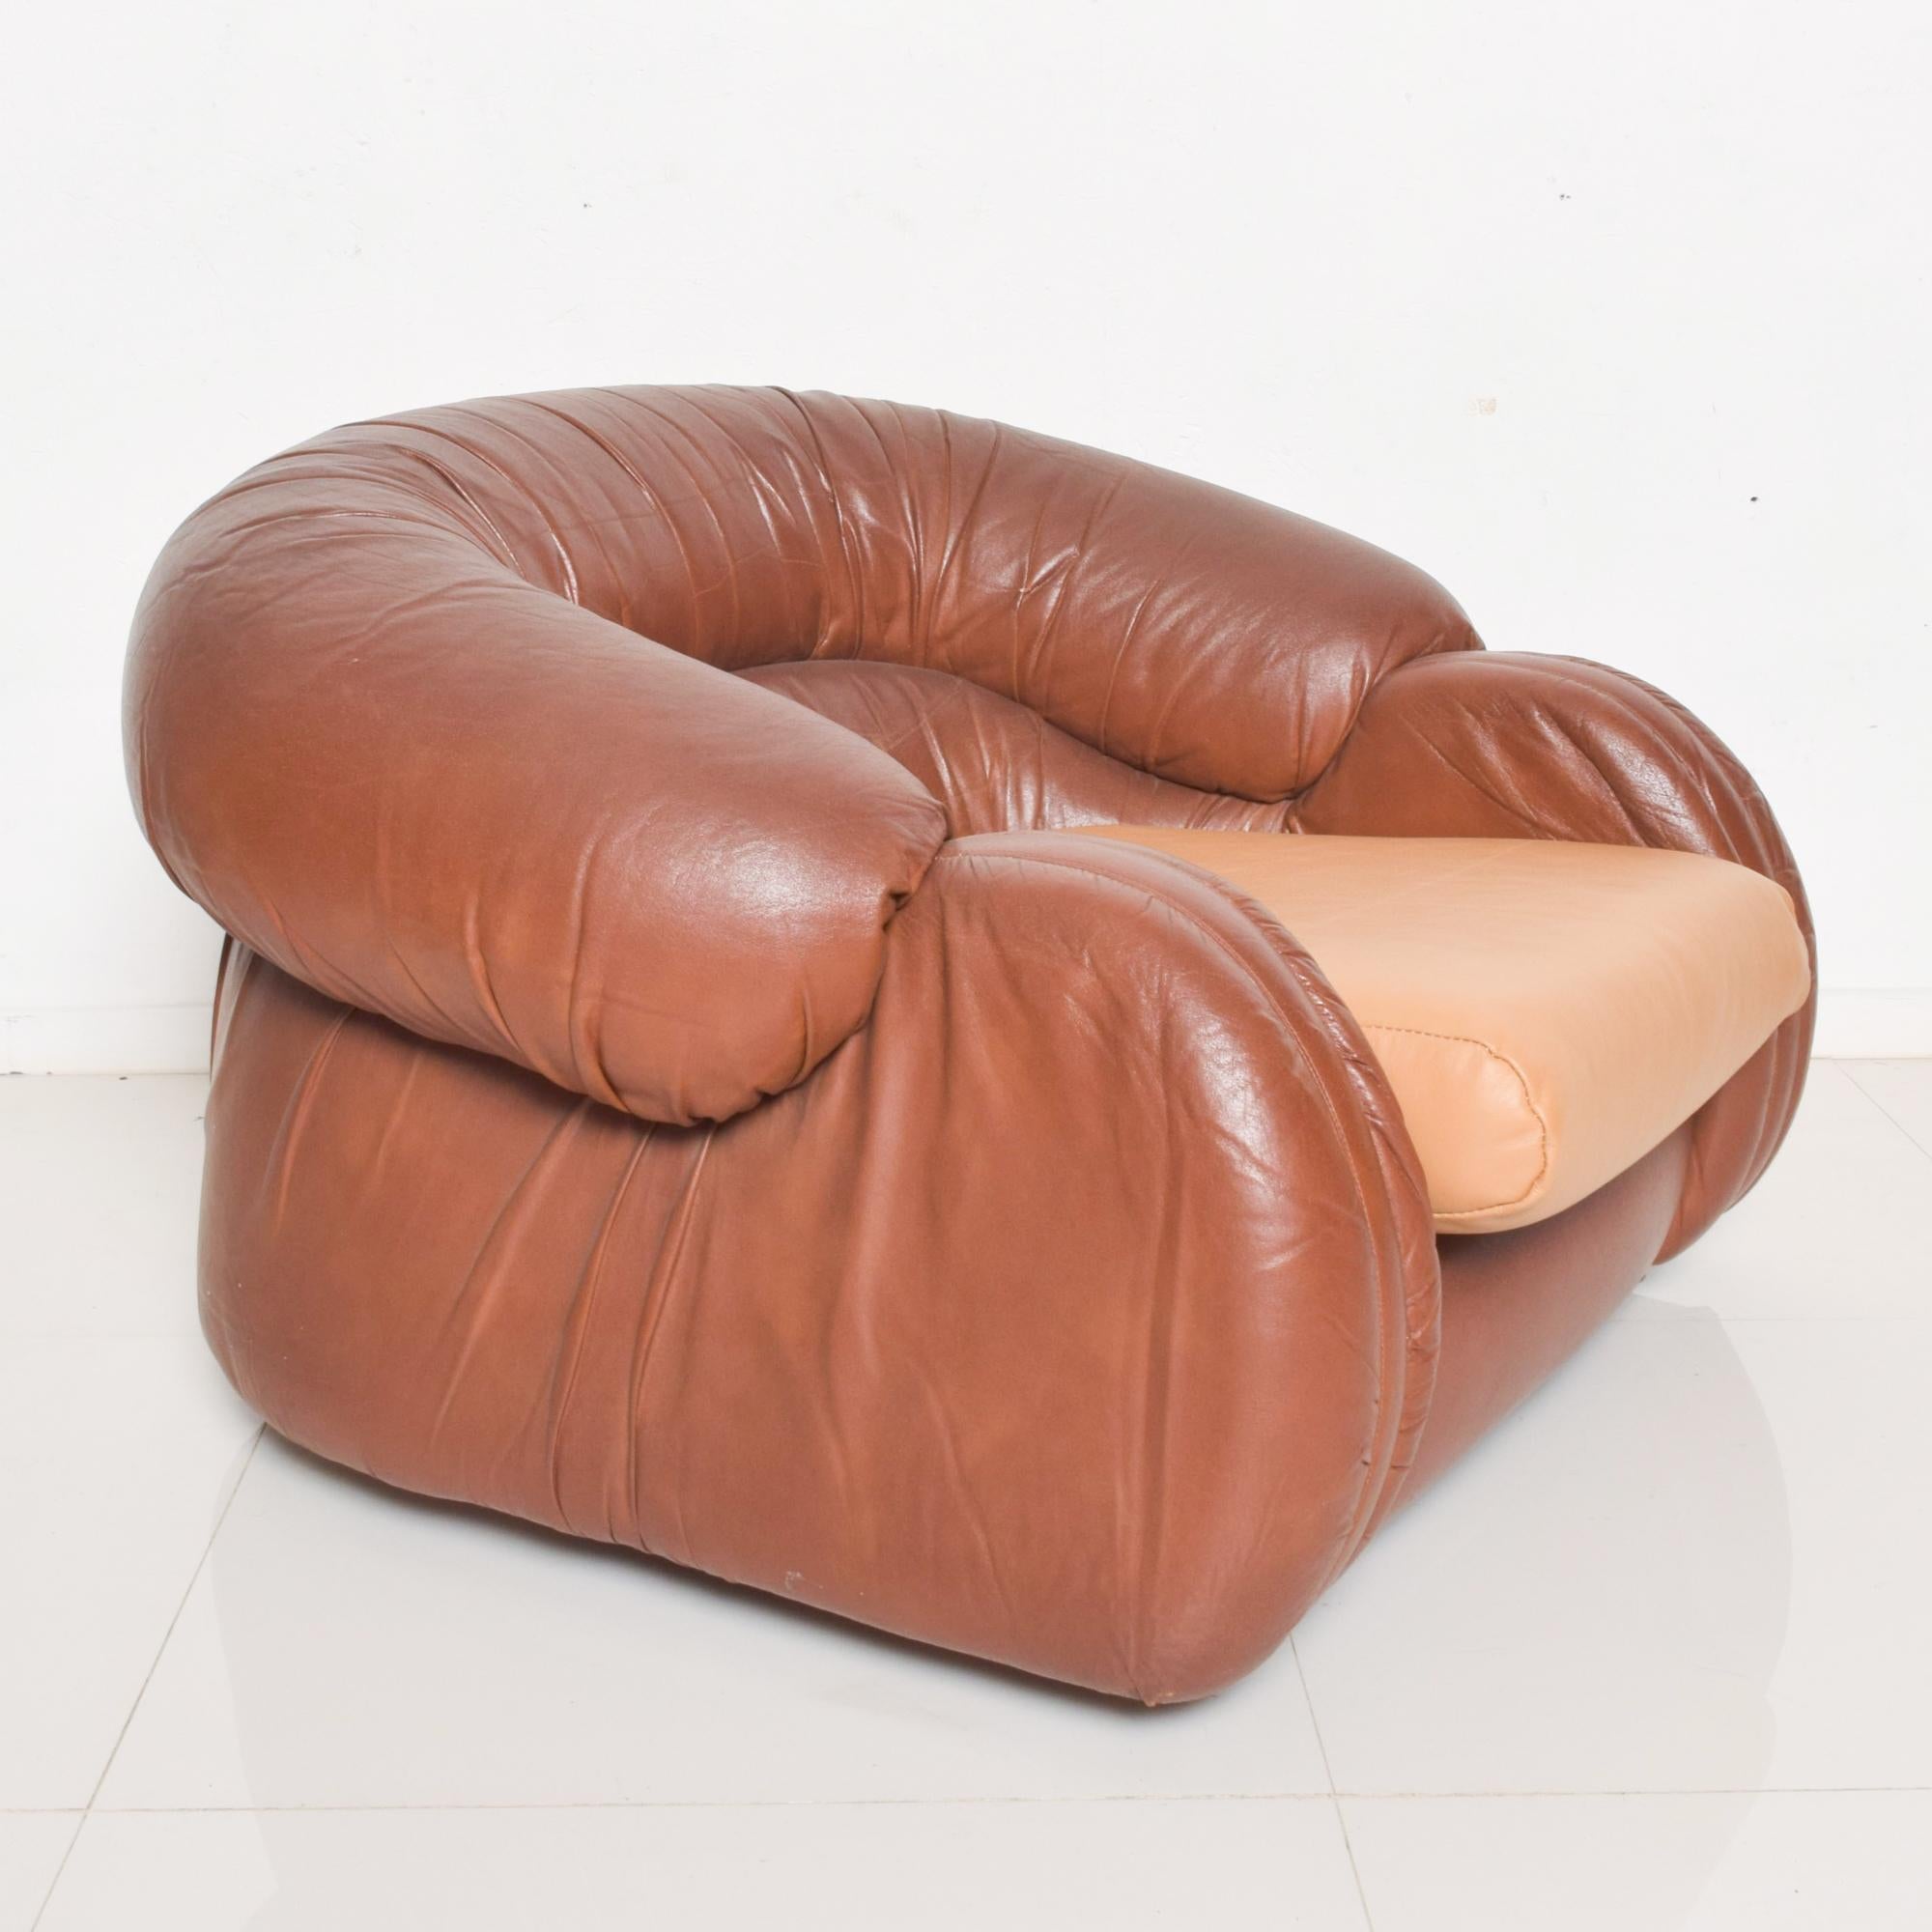 Low Lounge Seating
Fabulous Leather Comfy Lounge Chair seating in a Buttery Carmel two-tone by Giuseppe Munari for Poltrona Munari Italy 1960s.
Style similar to De Sede. Listing is for the pair.
Dimensions: 39W x 36.5 D x 23H, Seat 14 inches
This